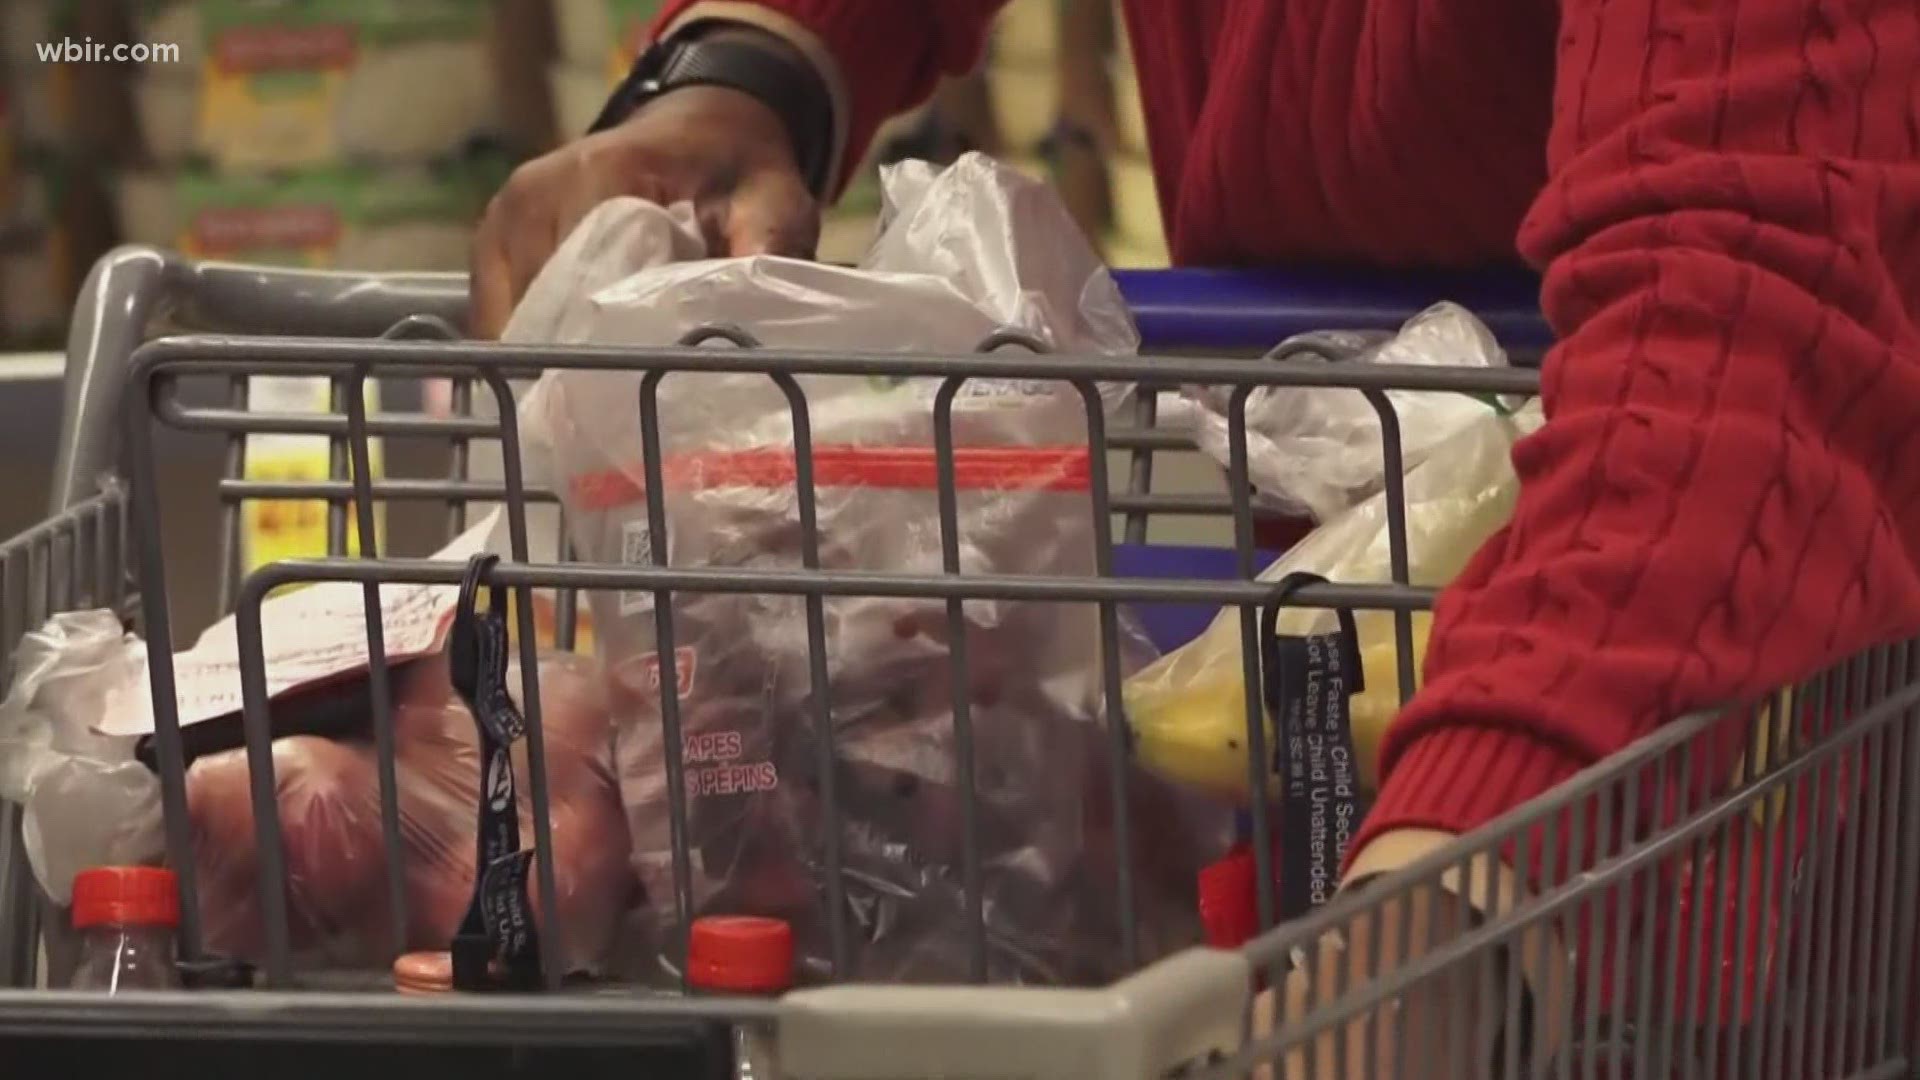 A new federal aid program aims to feed hungry children this summer.